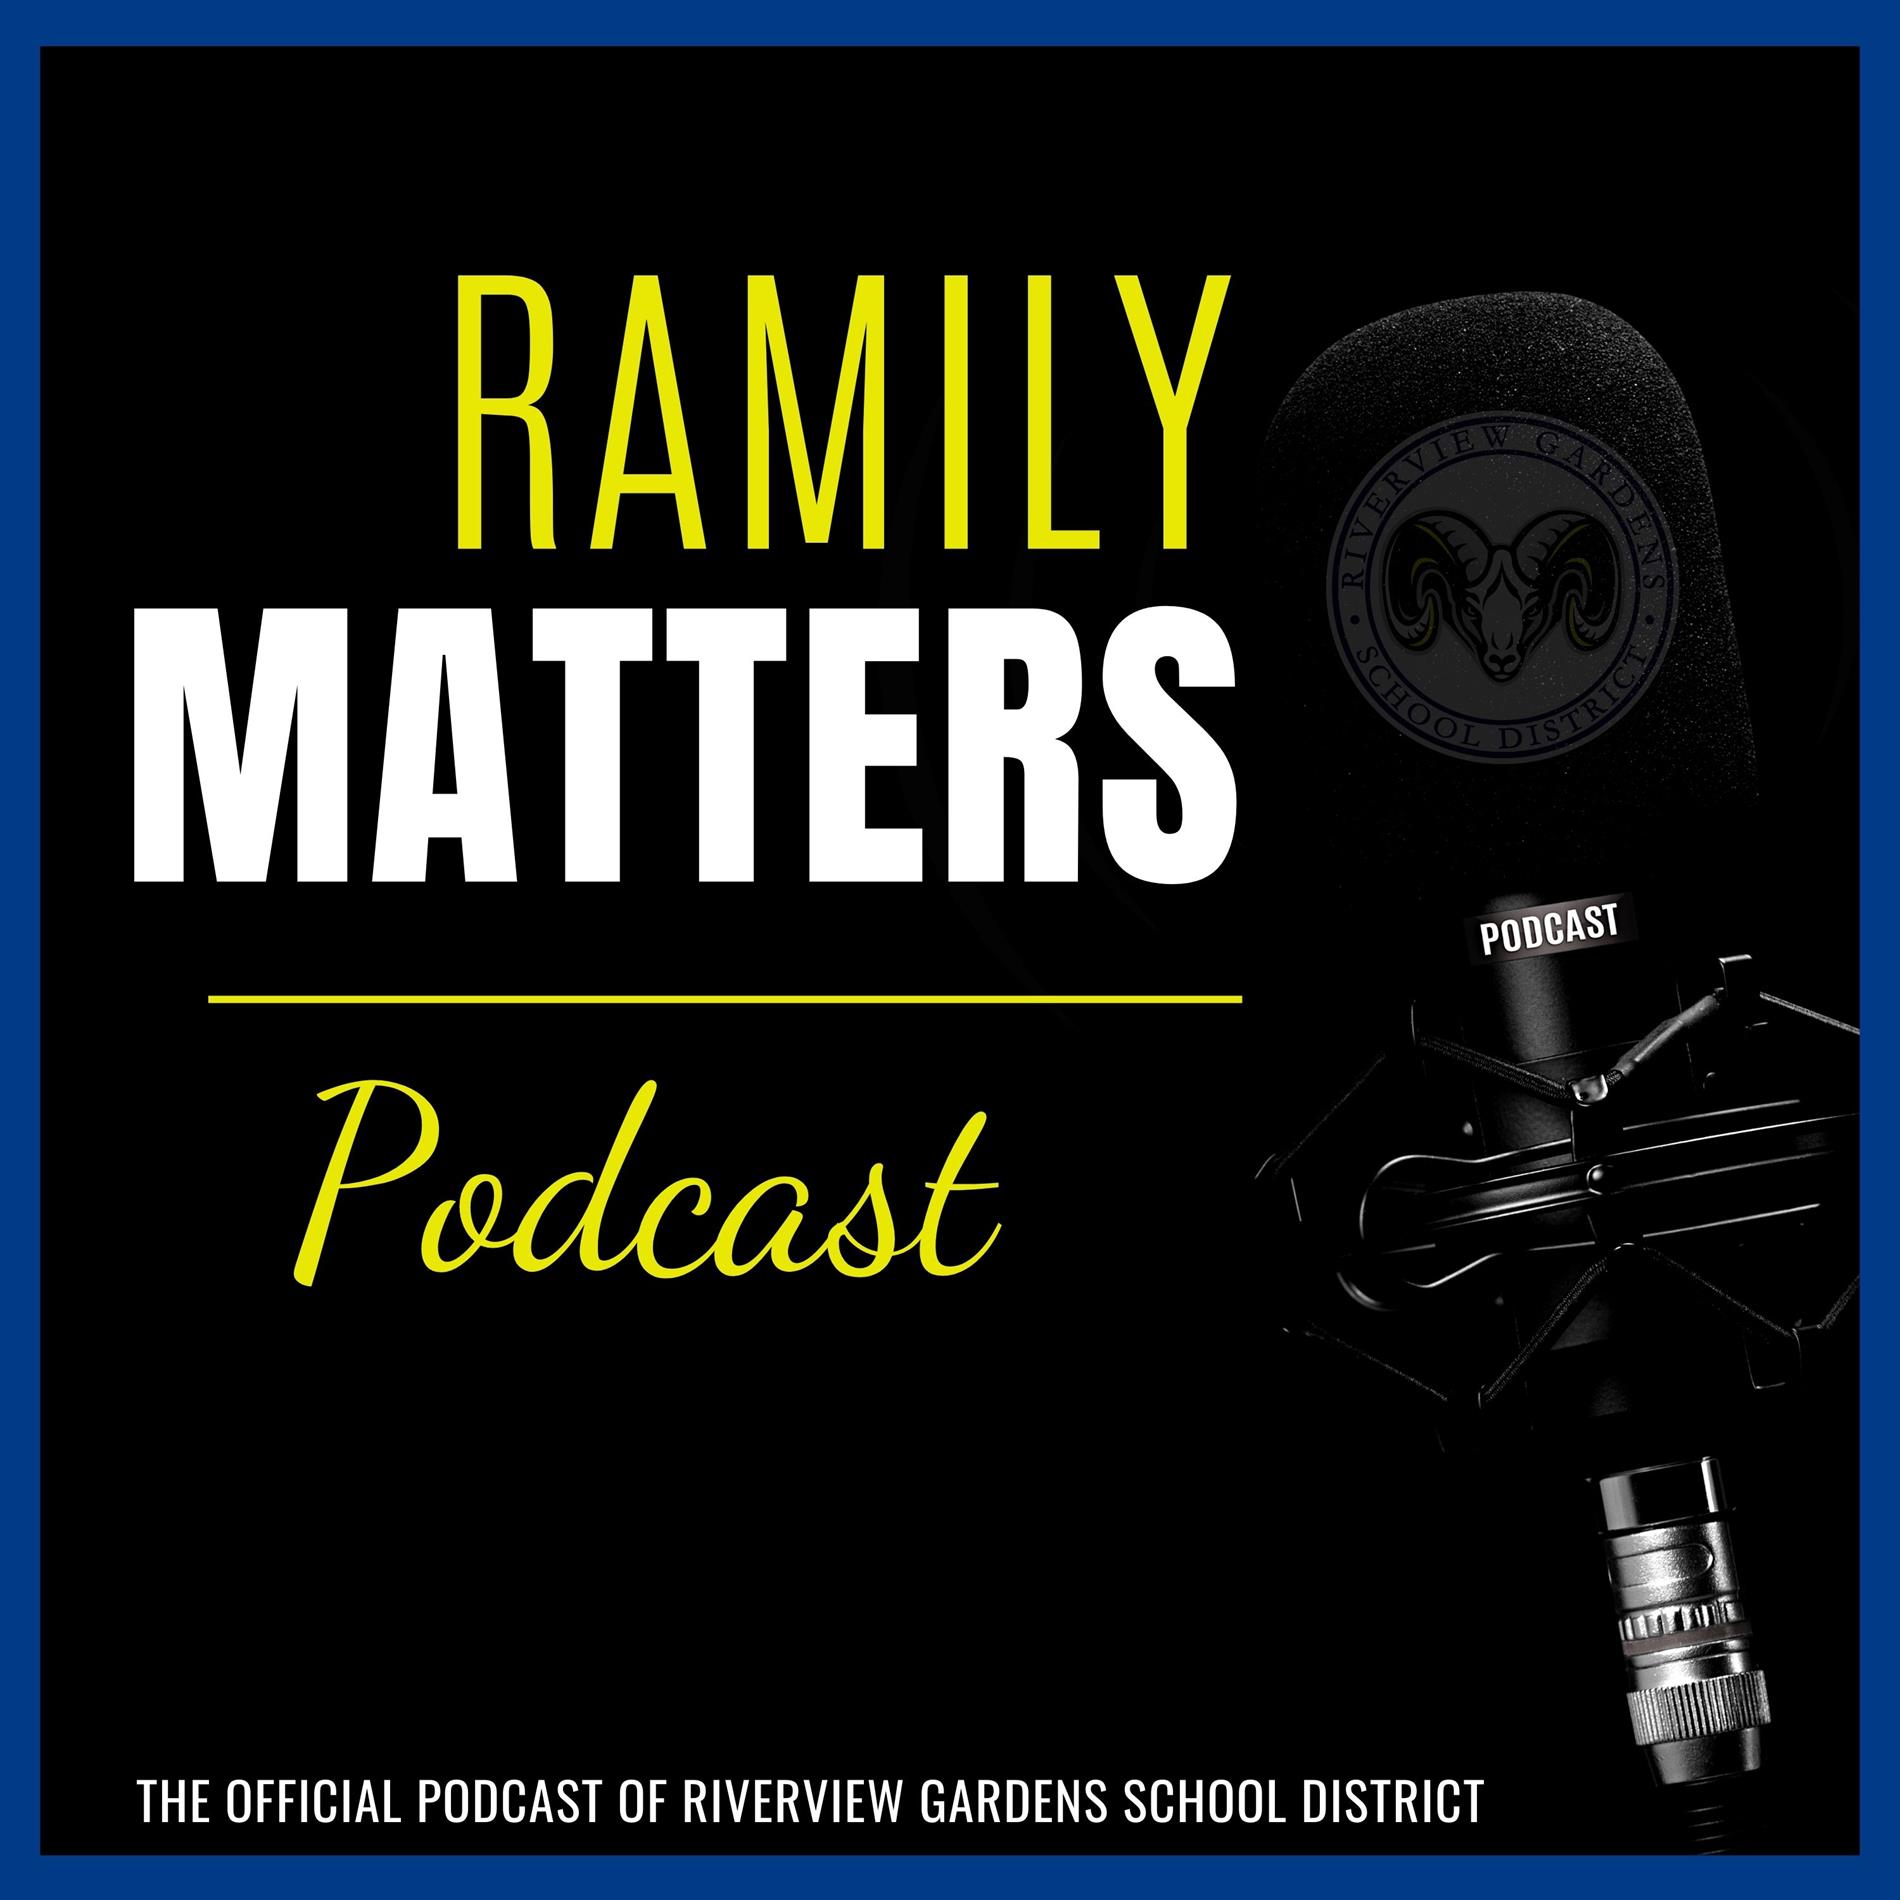 Ramily Matters Podcast